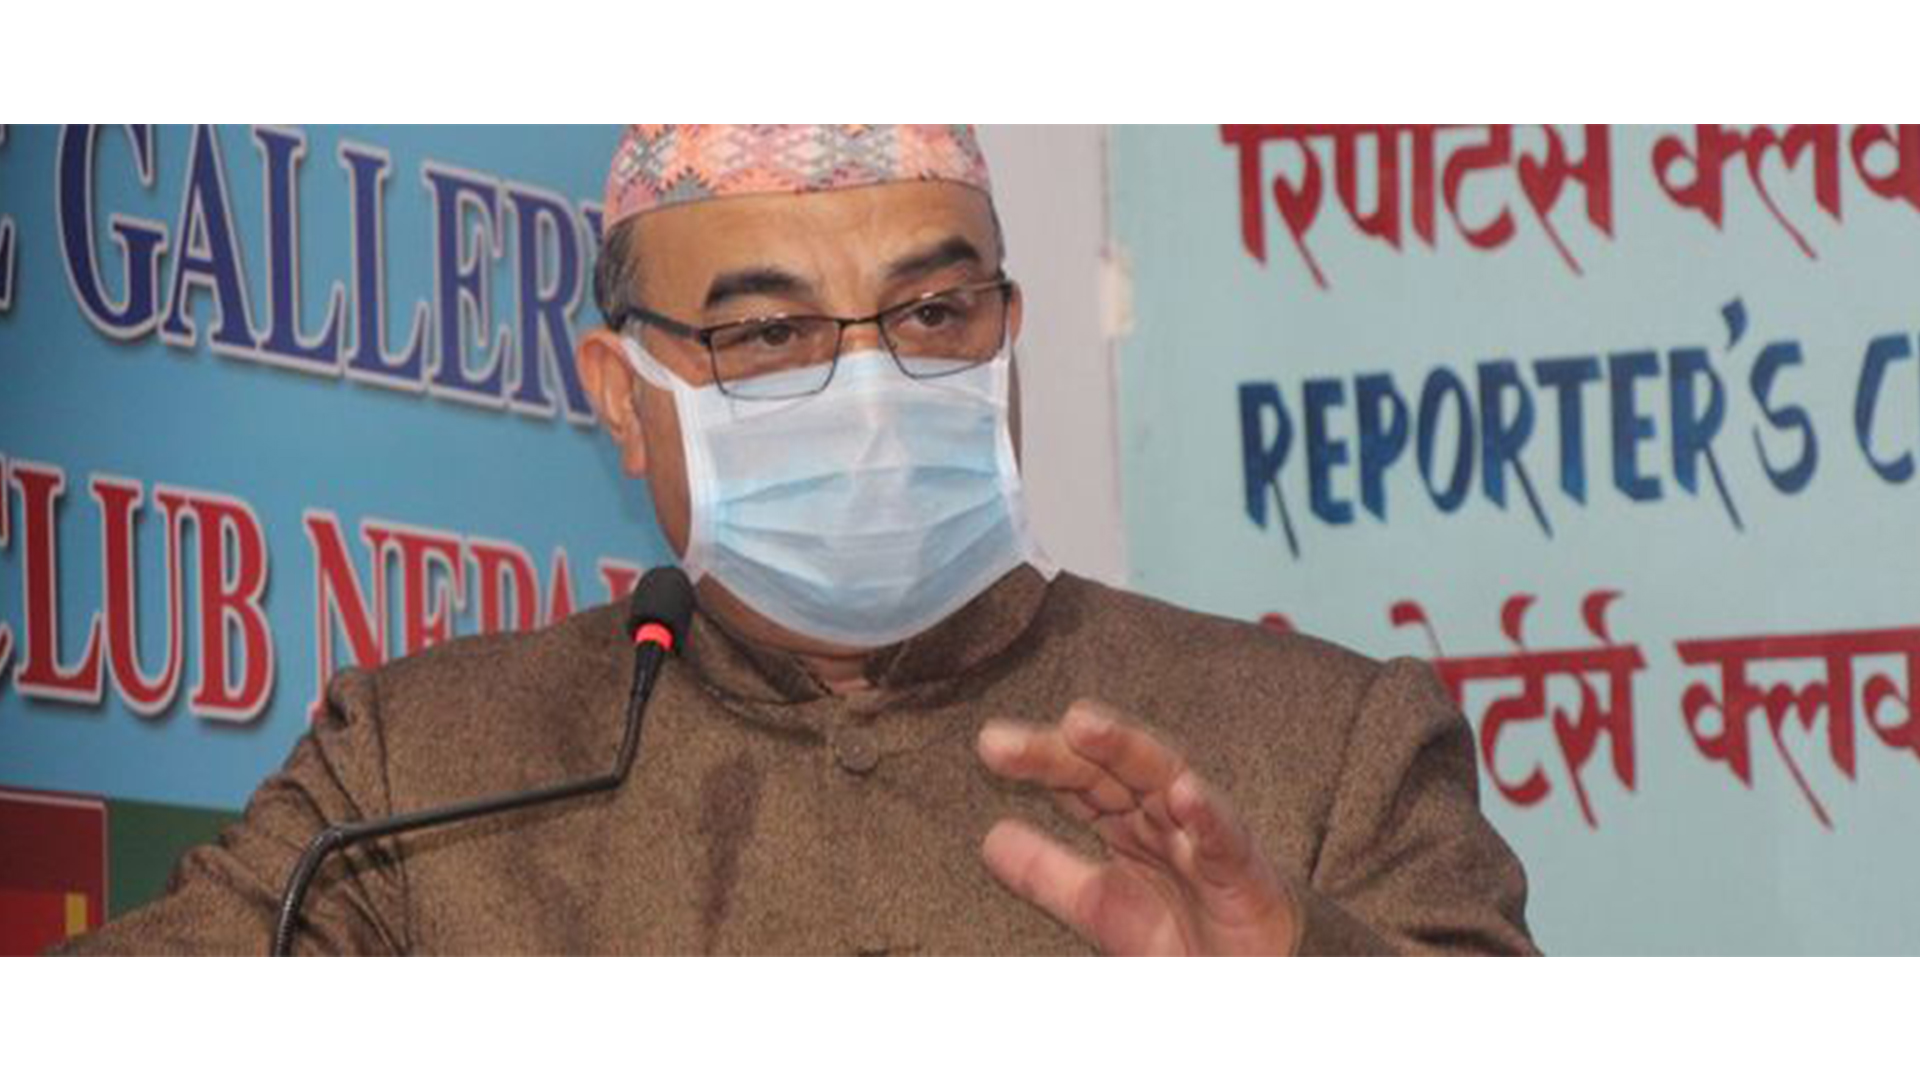 Claims of significant improvement and progress in health sector: Dr. Karki